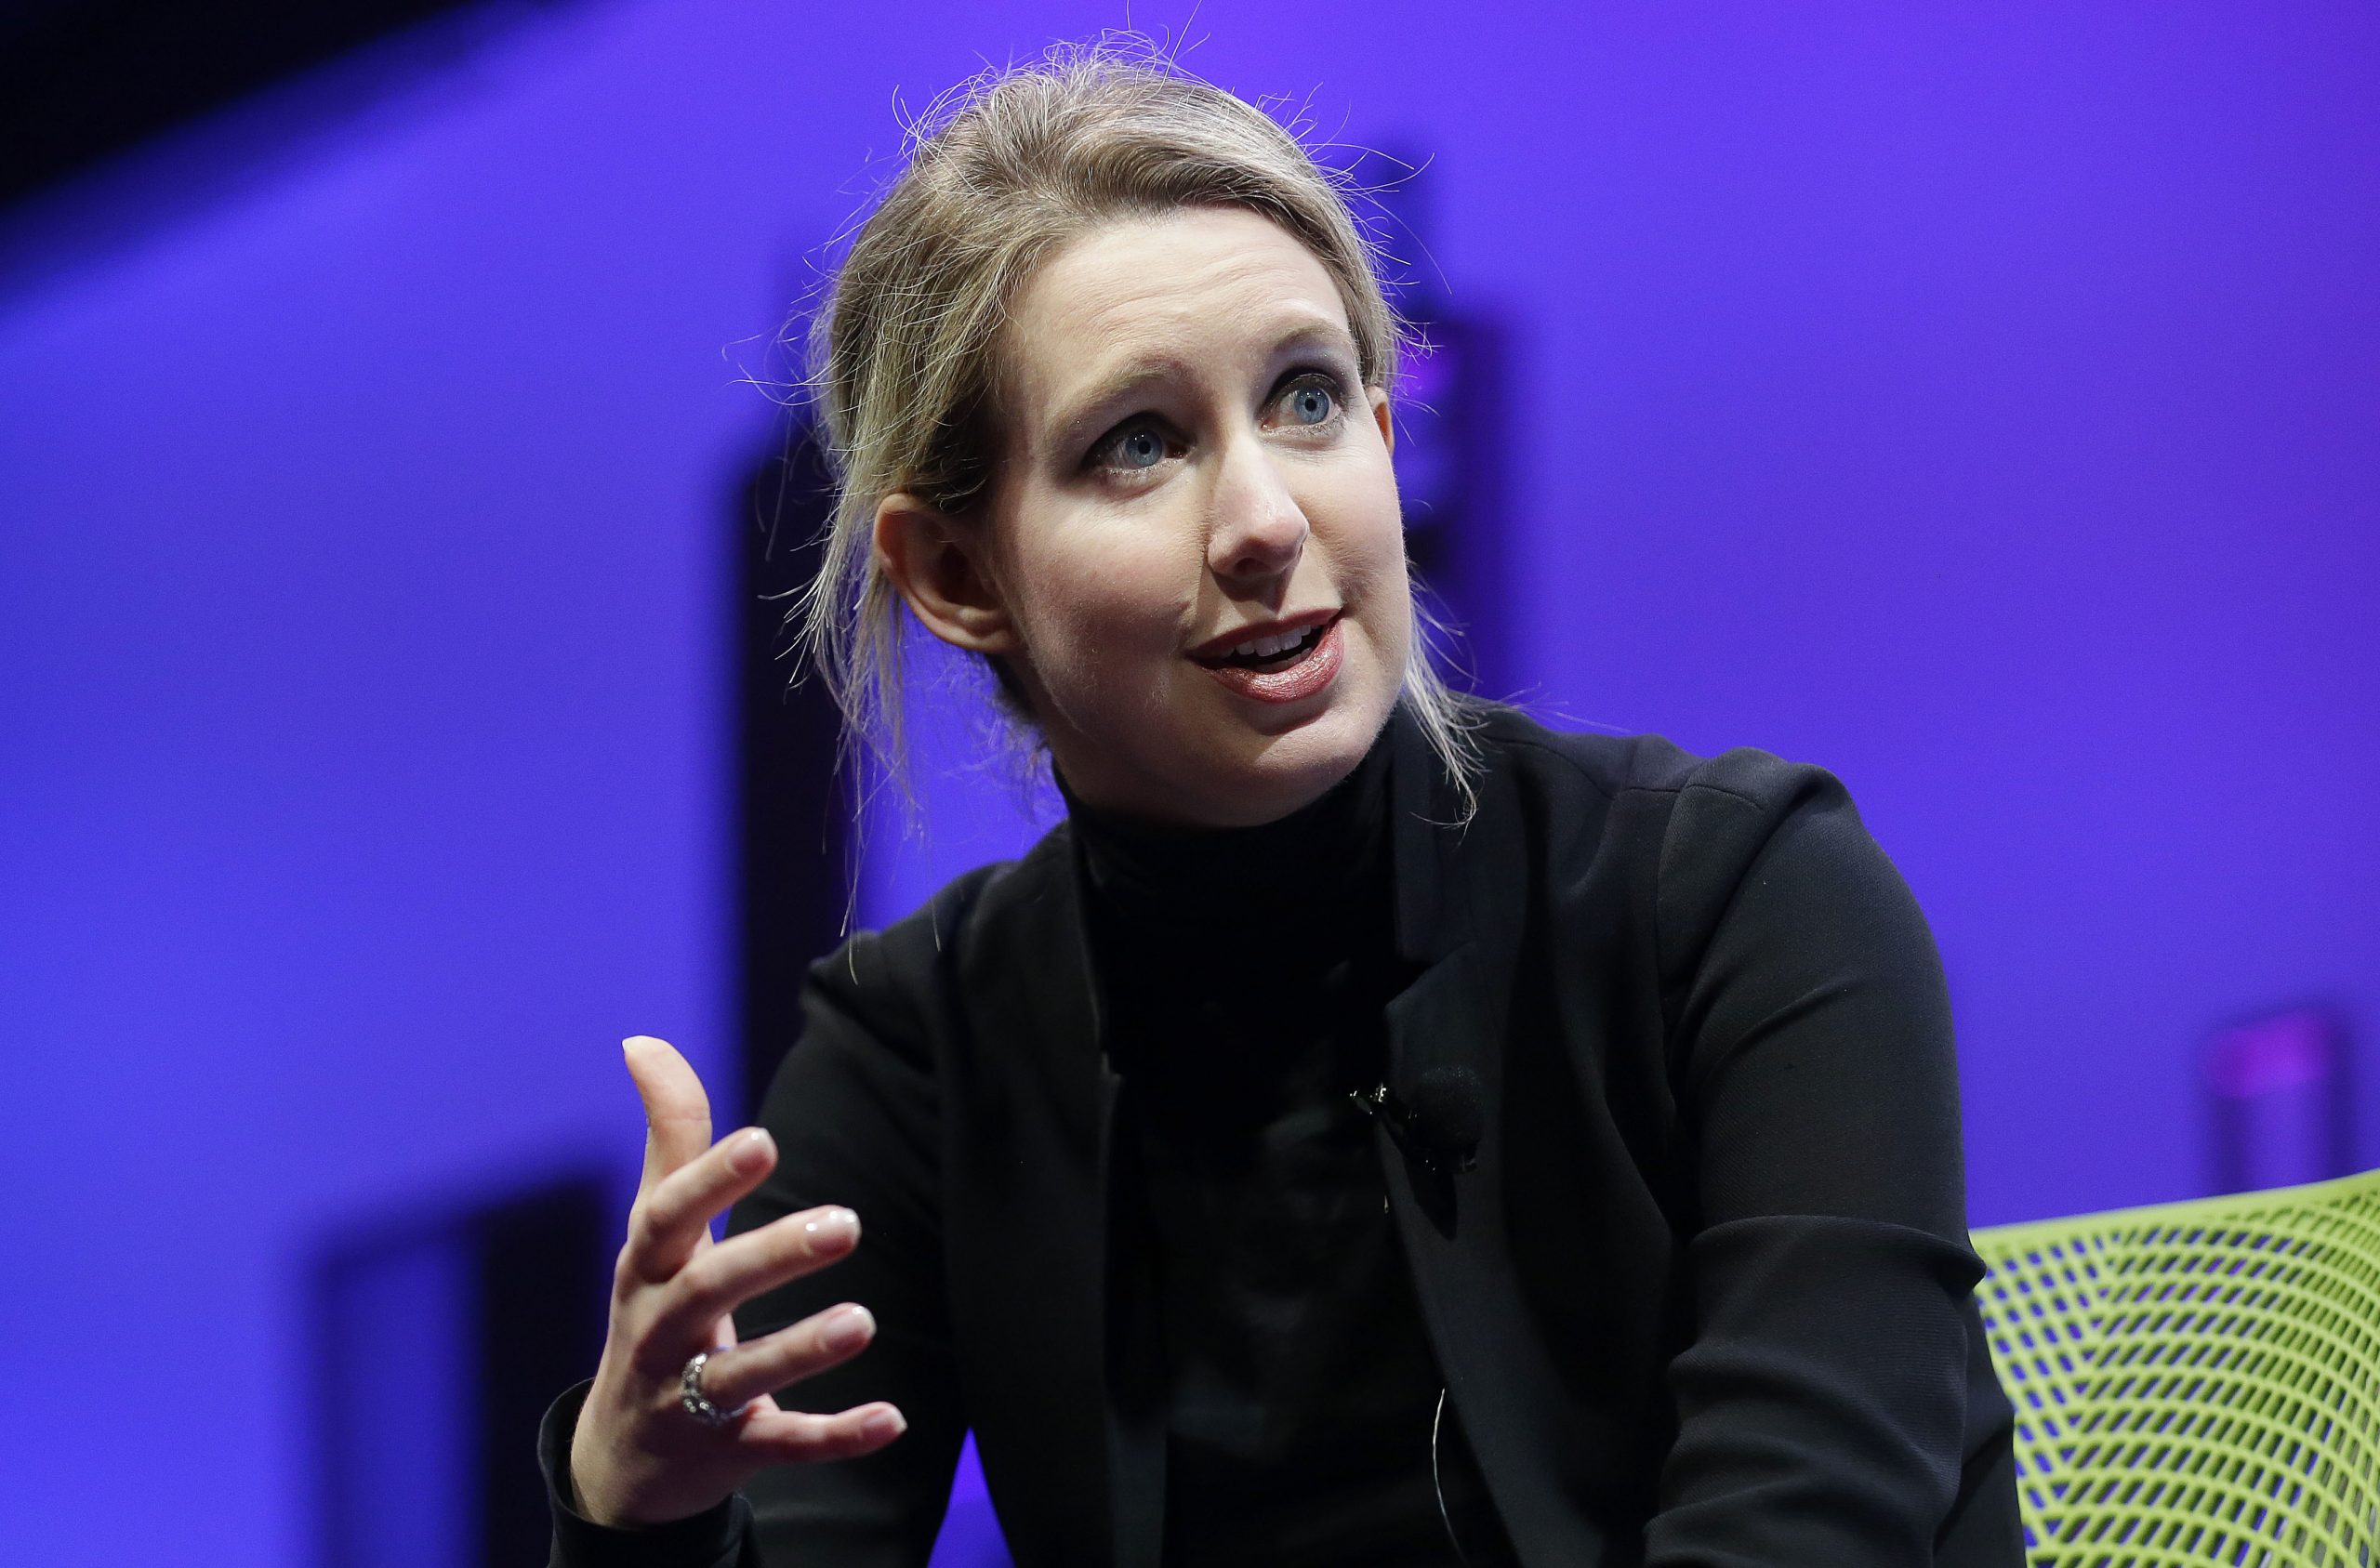 Elizabeth Holmes, founder and former CEO of Theranos, speaks at an event in San Francisco.